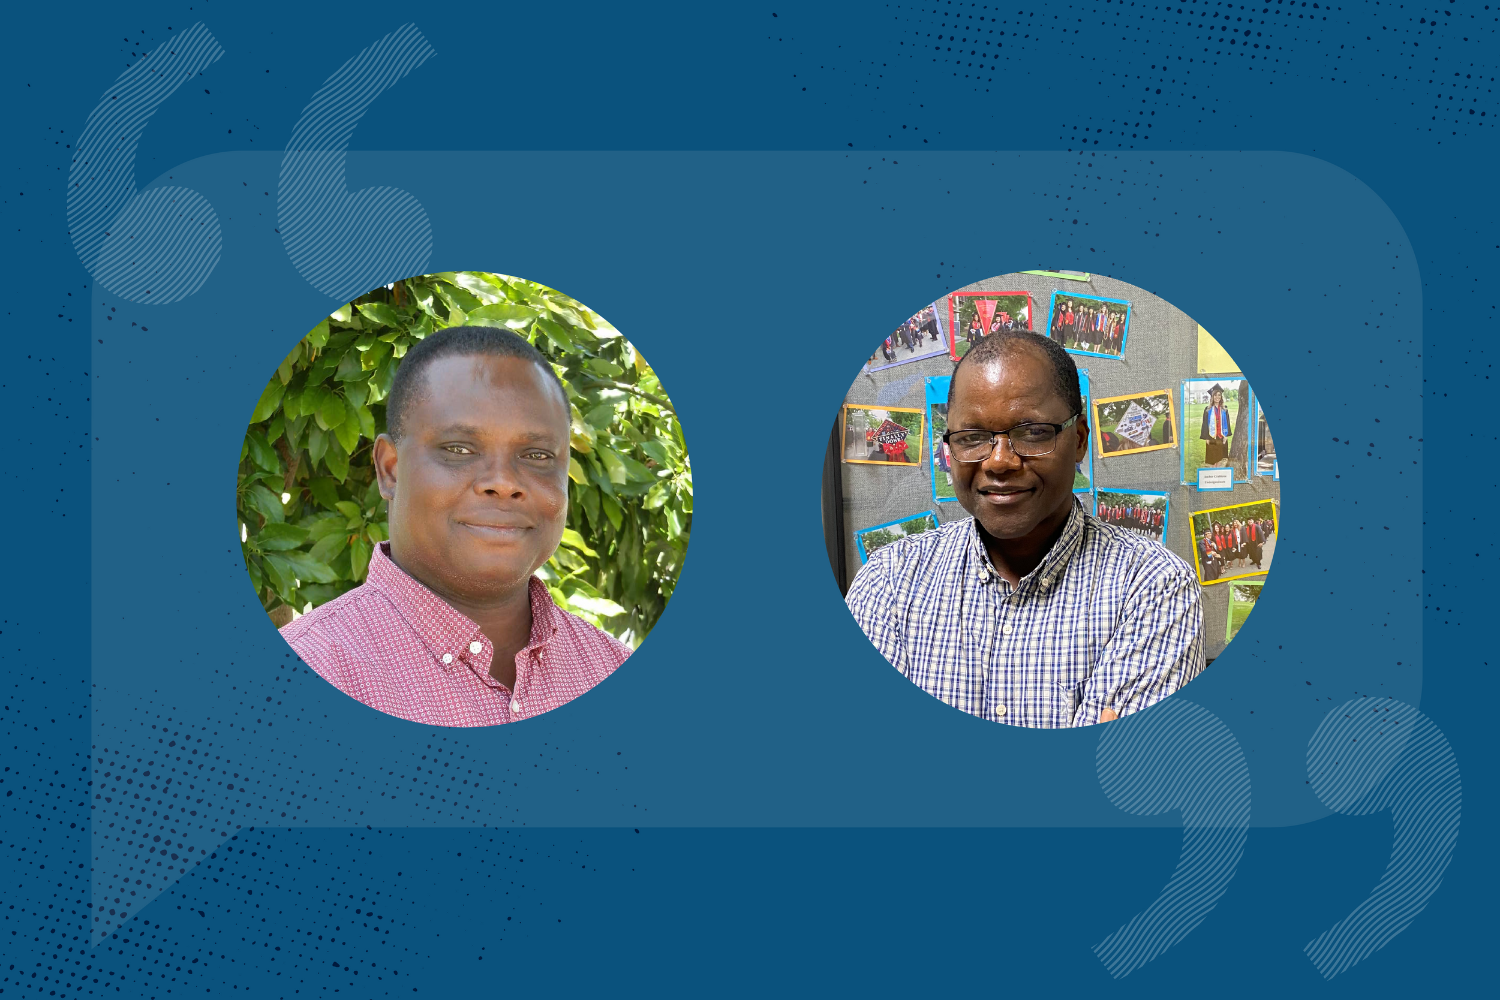 Professor Augustine Avwunudiogba (pictured left) and Professor Abu Mboka (pictured right) on a contemporary blue background.